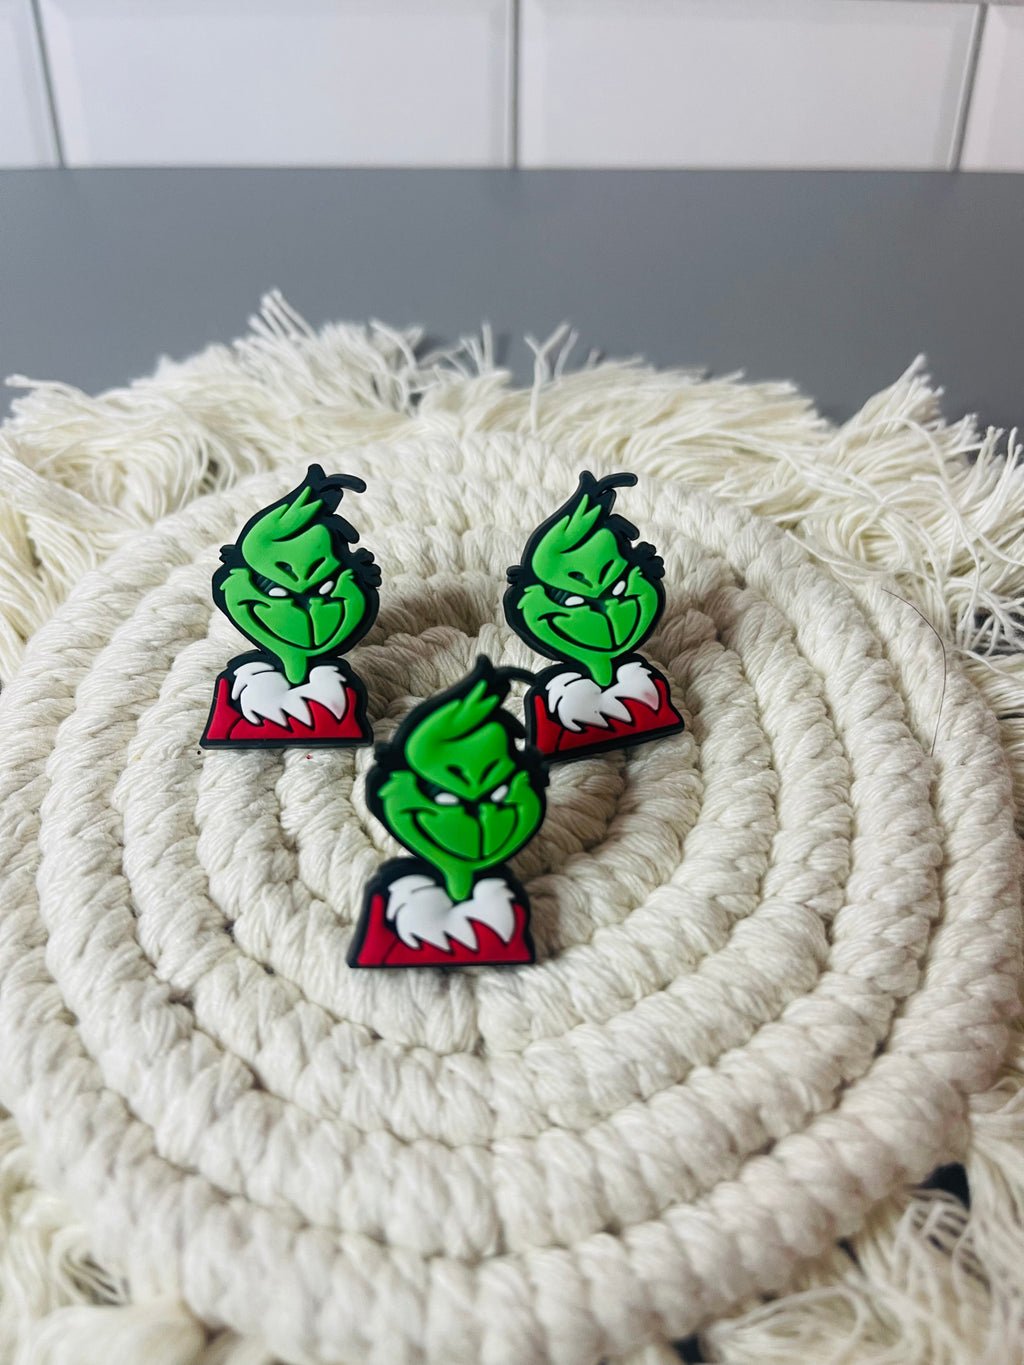 Grinch Straw Topper l Straw Topper l Grinch Straw Cover l Stanley Cup Straw  Topper l Universal Straw Topper